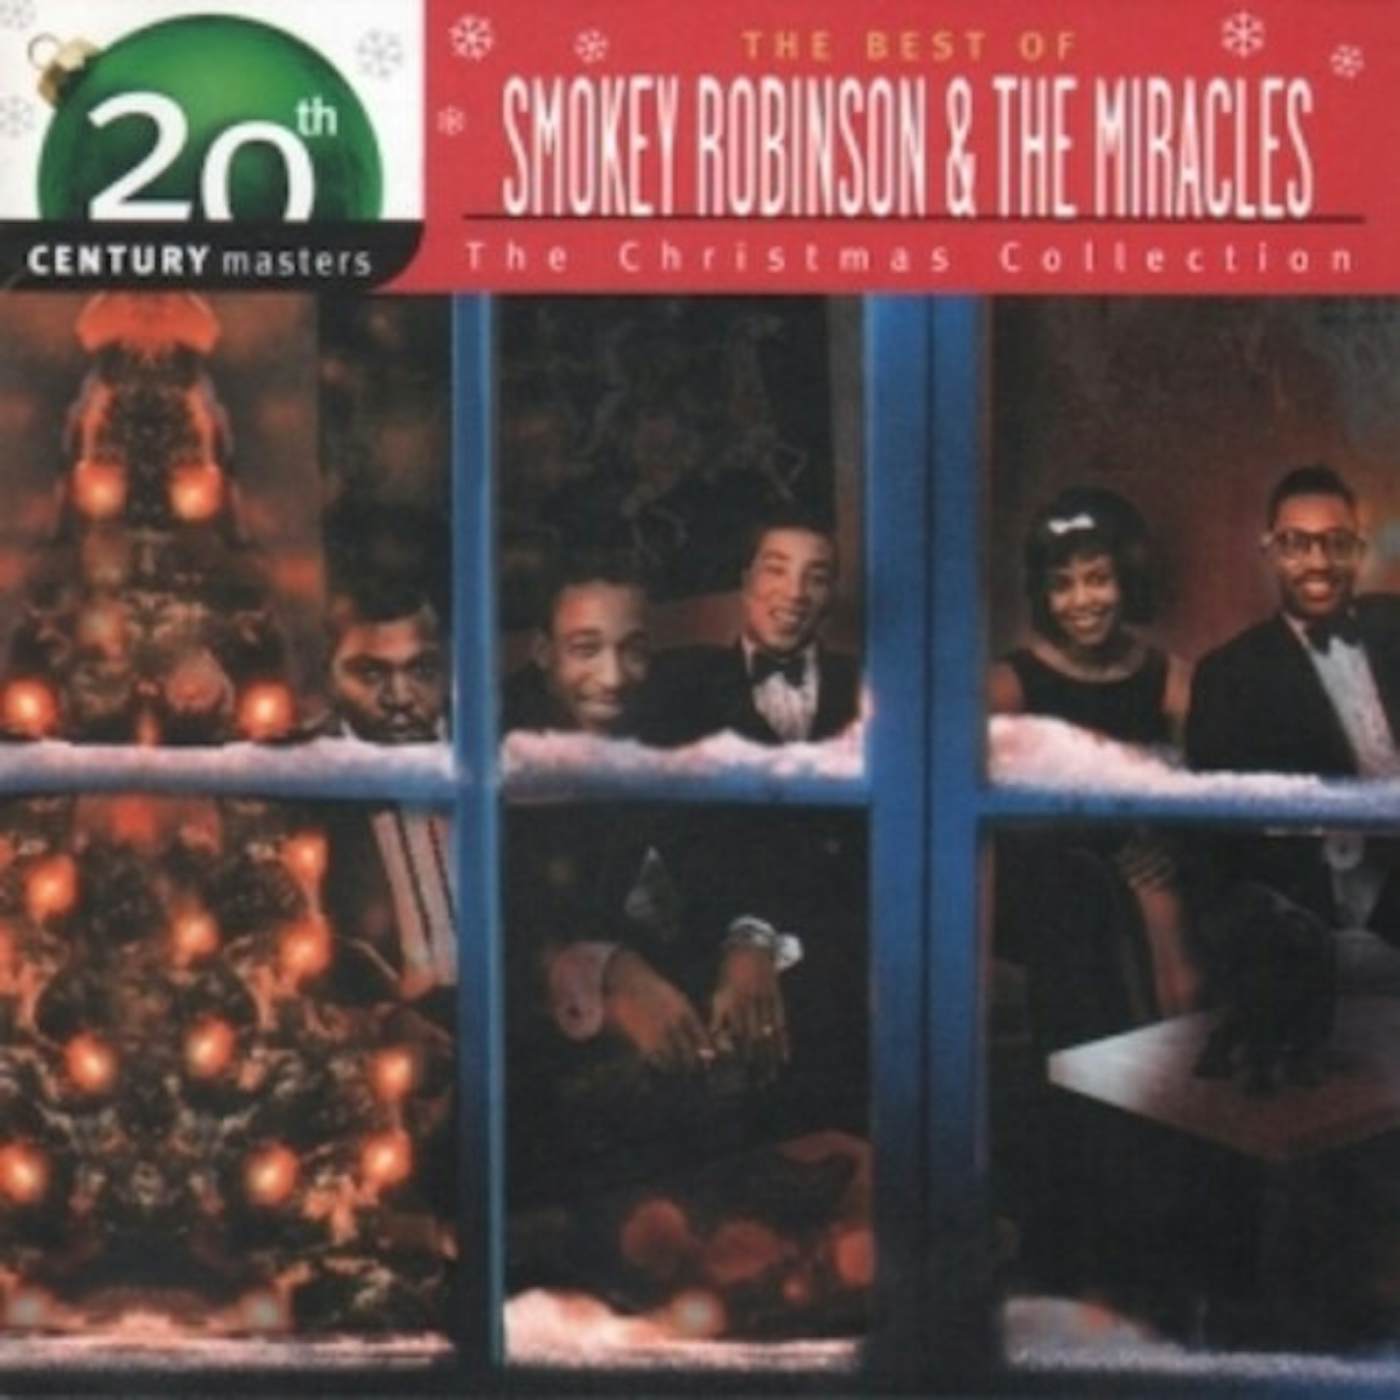 Smokey Robinson & The Miracles CHRISTMAS COLLECTION: 20TH CENTURY MASTERS CD